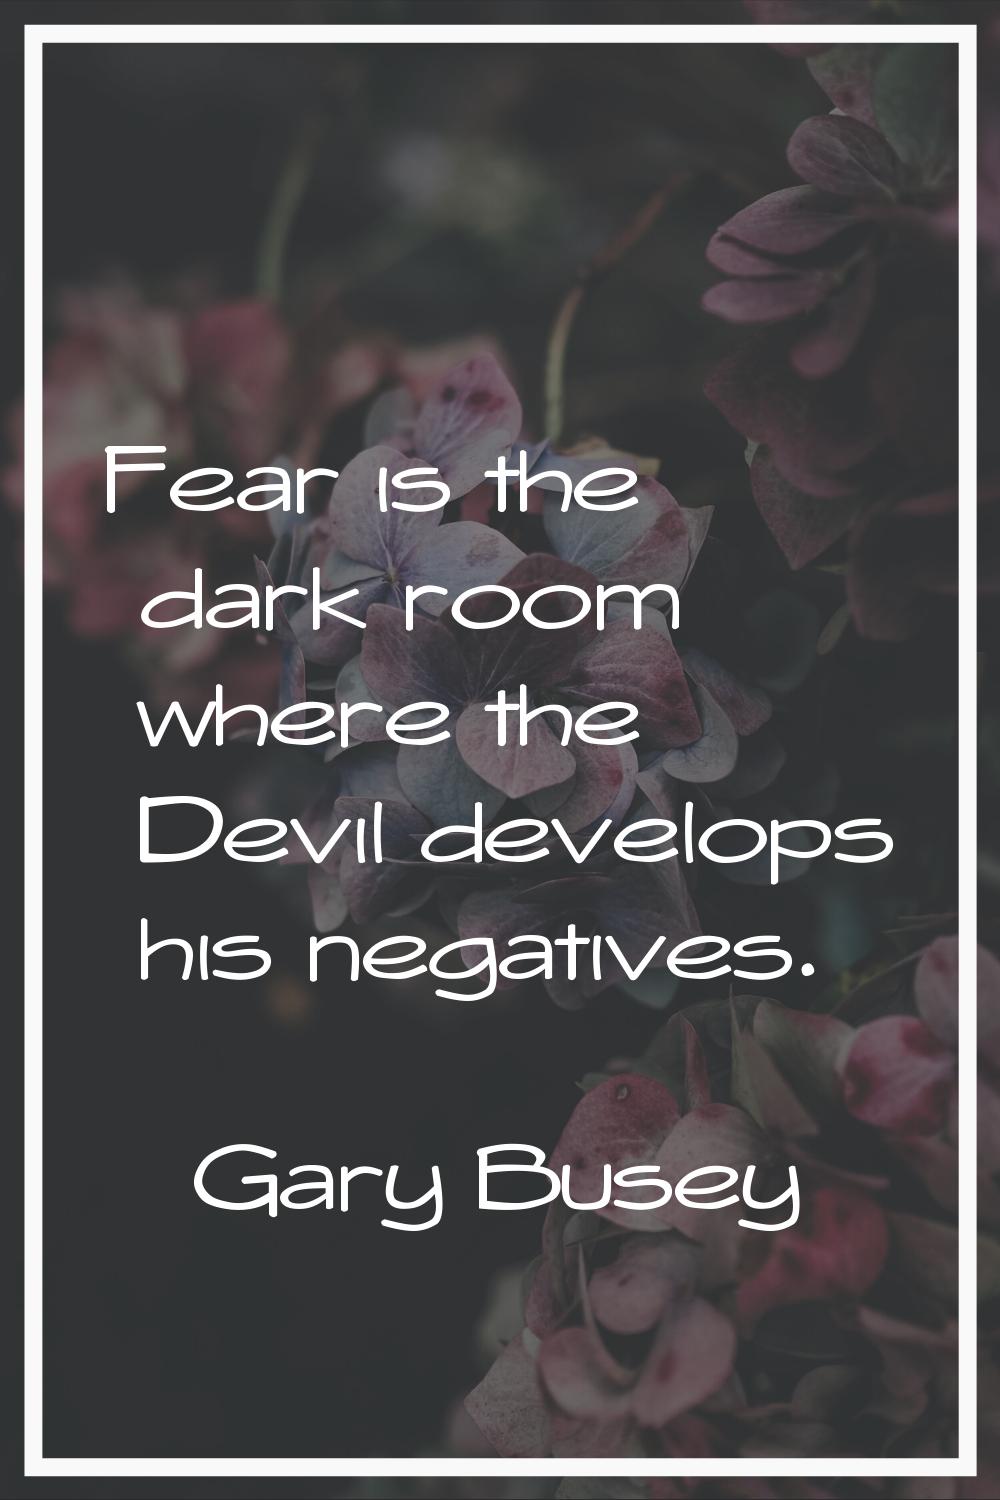 Fear is the dark room where the Devil develops his negatives.